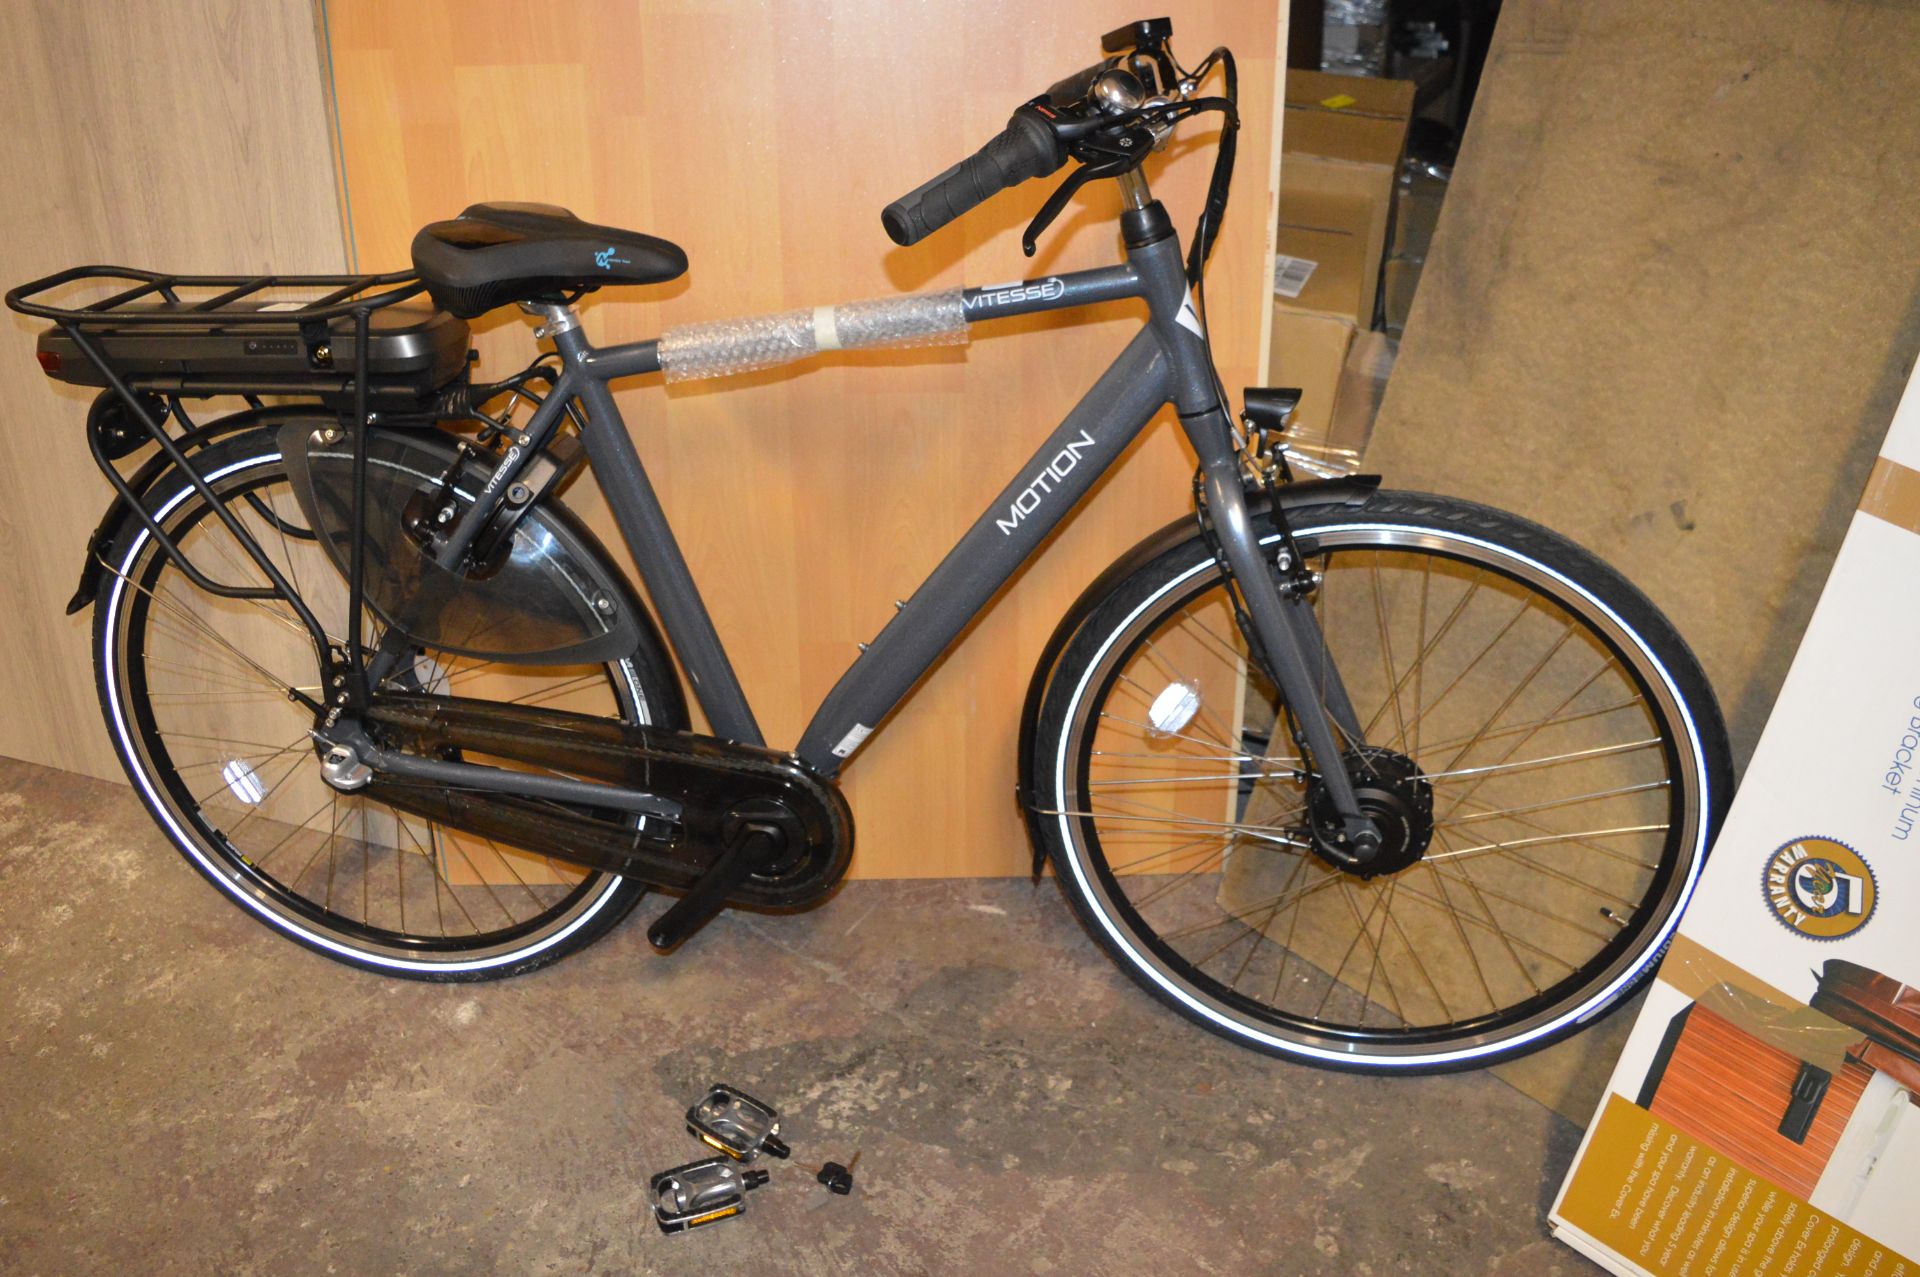 *Vitesse Motion Electric Bicycle